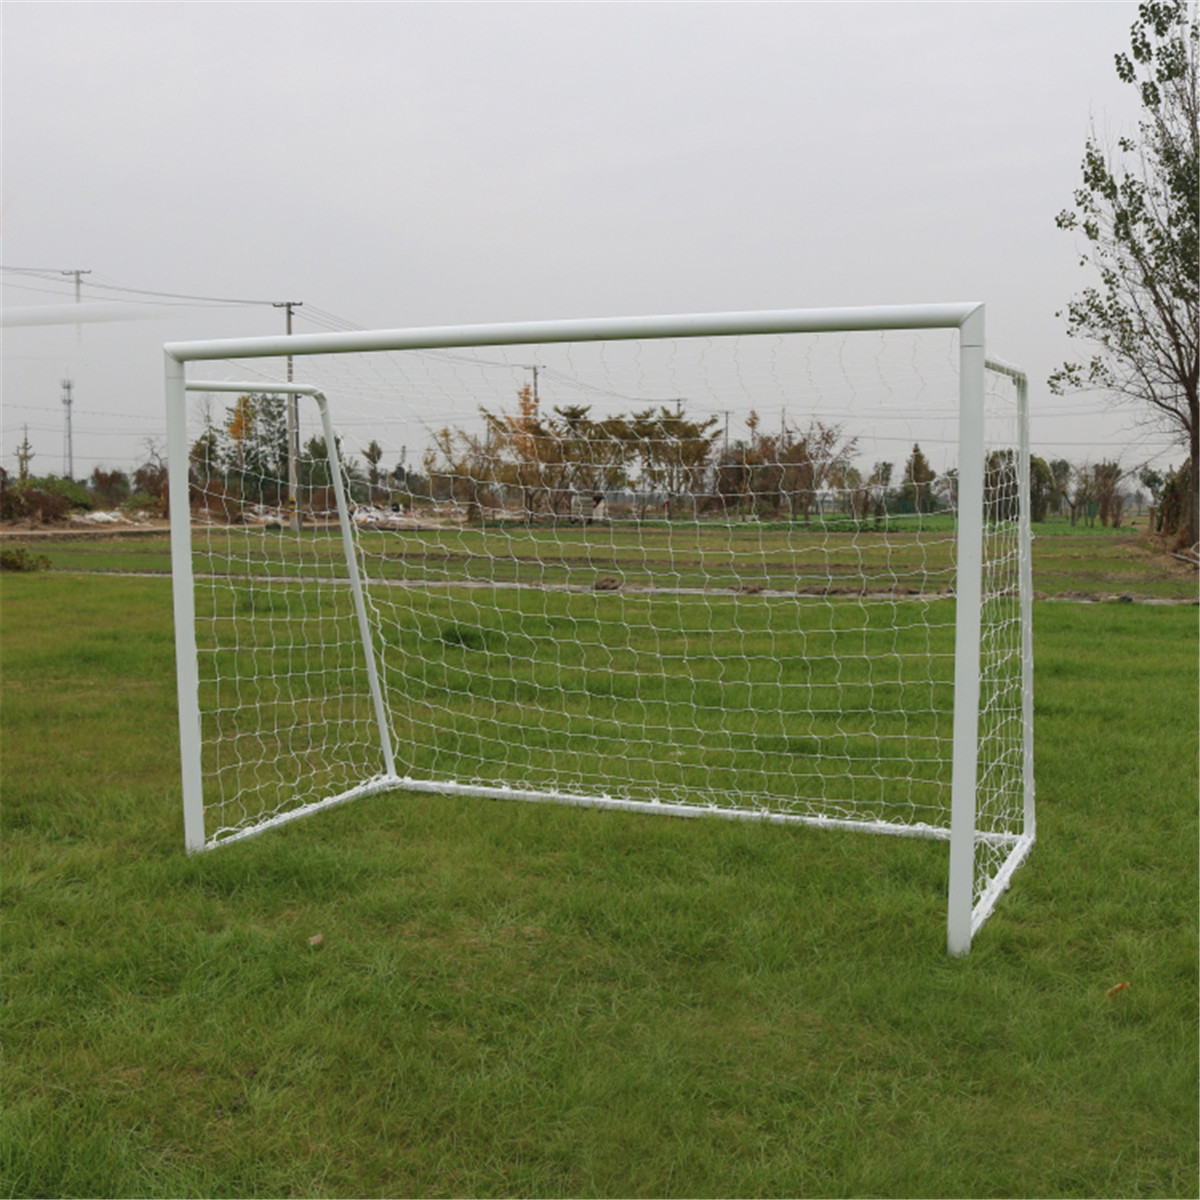 Football-Soccer-Goal-Post-Net-Training-Match-Replace-Outdoor-Full-Size-Adult-Kid-1249189